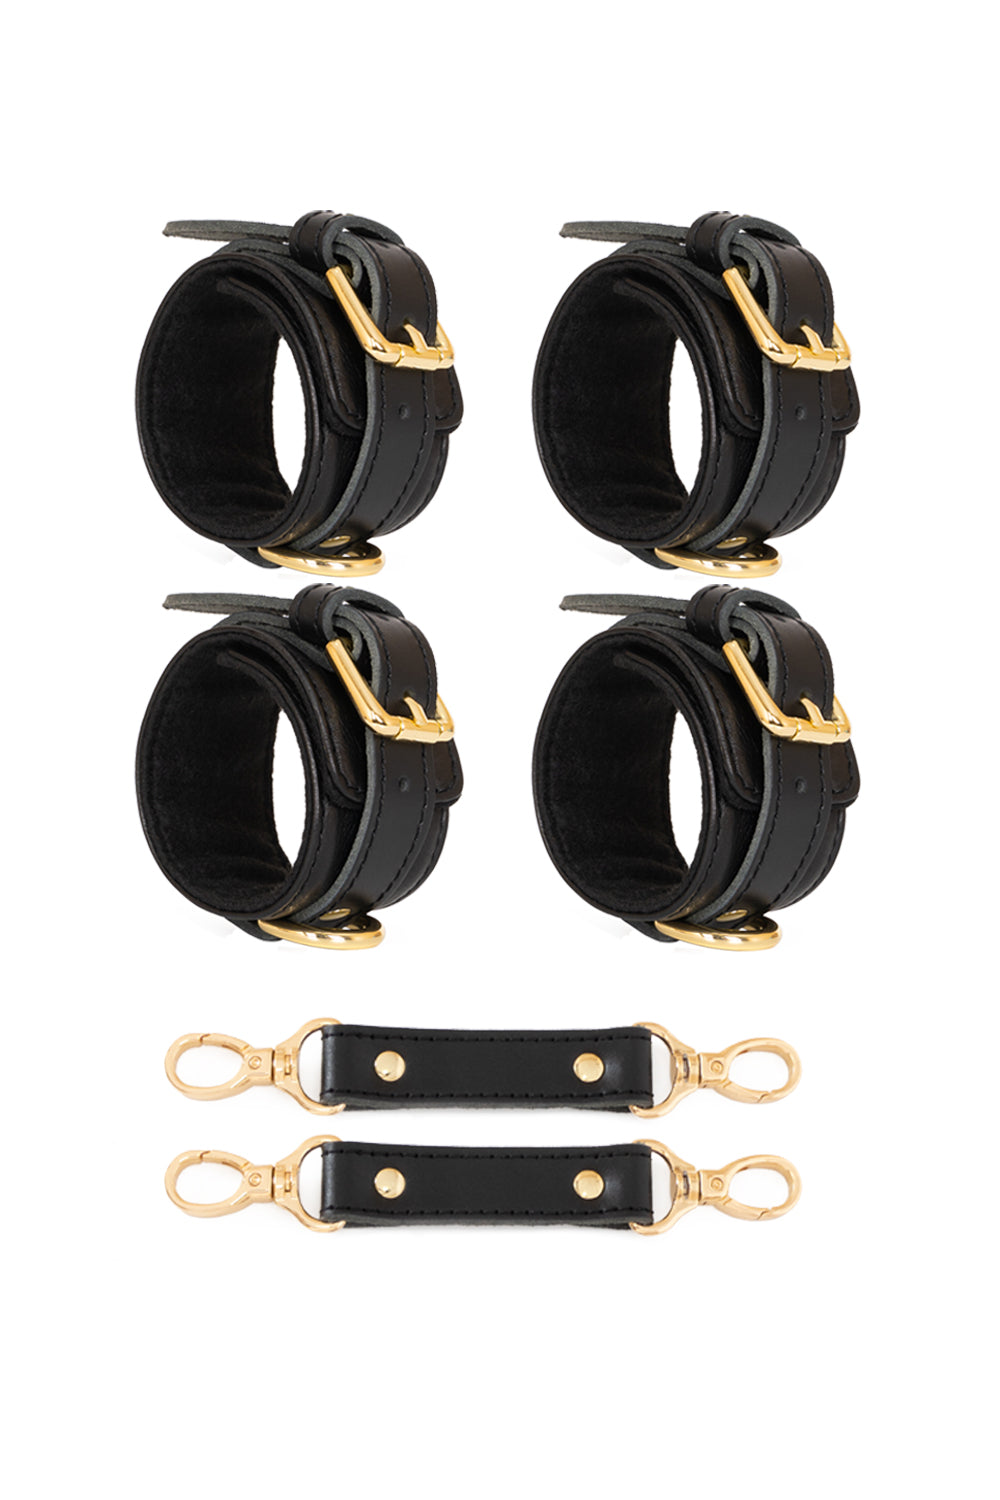 2 in 1 Hand and Ankle cuffs Leather Set. 10 colors